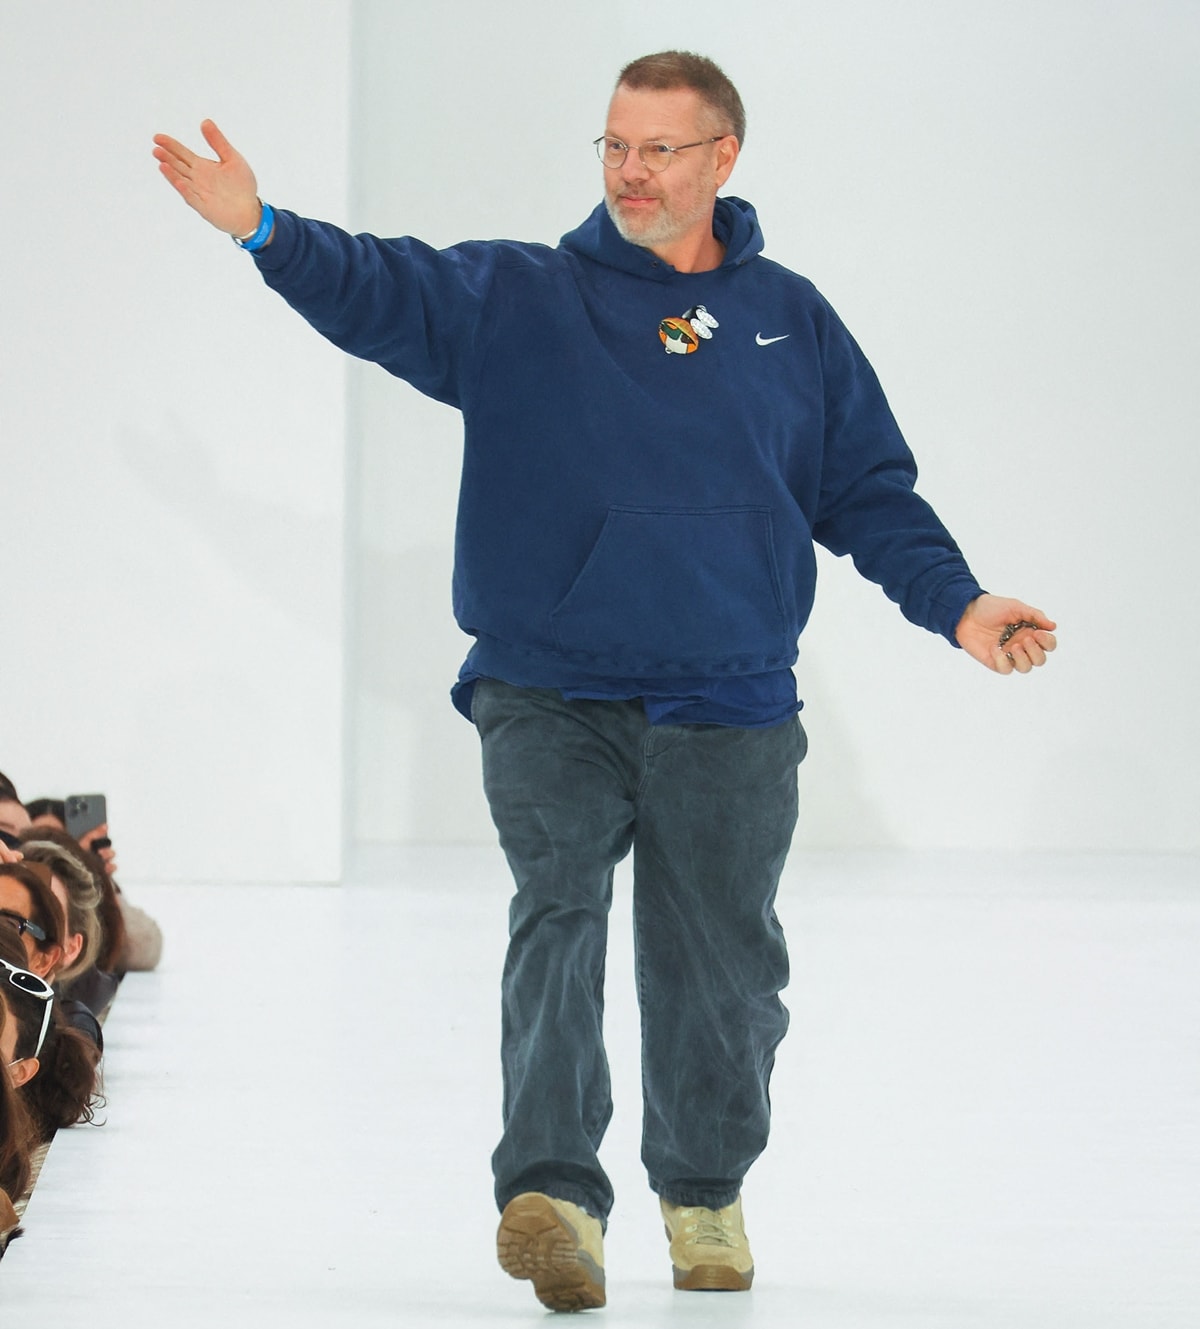 Designer Jonny Johansson, the creative director and co-founder of the Stockholm-based multidisciplinary fashion house Acne Studios, acknowledges the audience during the Acne Studios Womenswear Fall/Winter 2022/2023 show